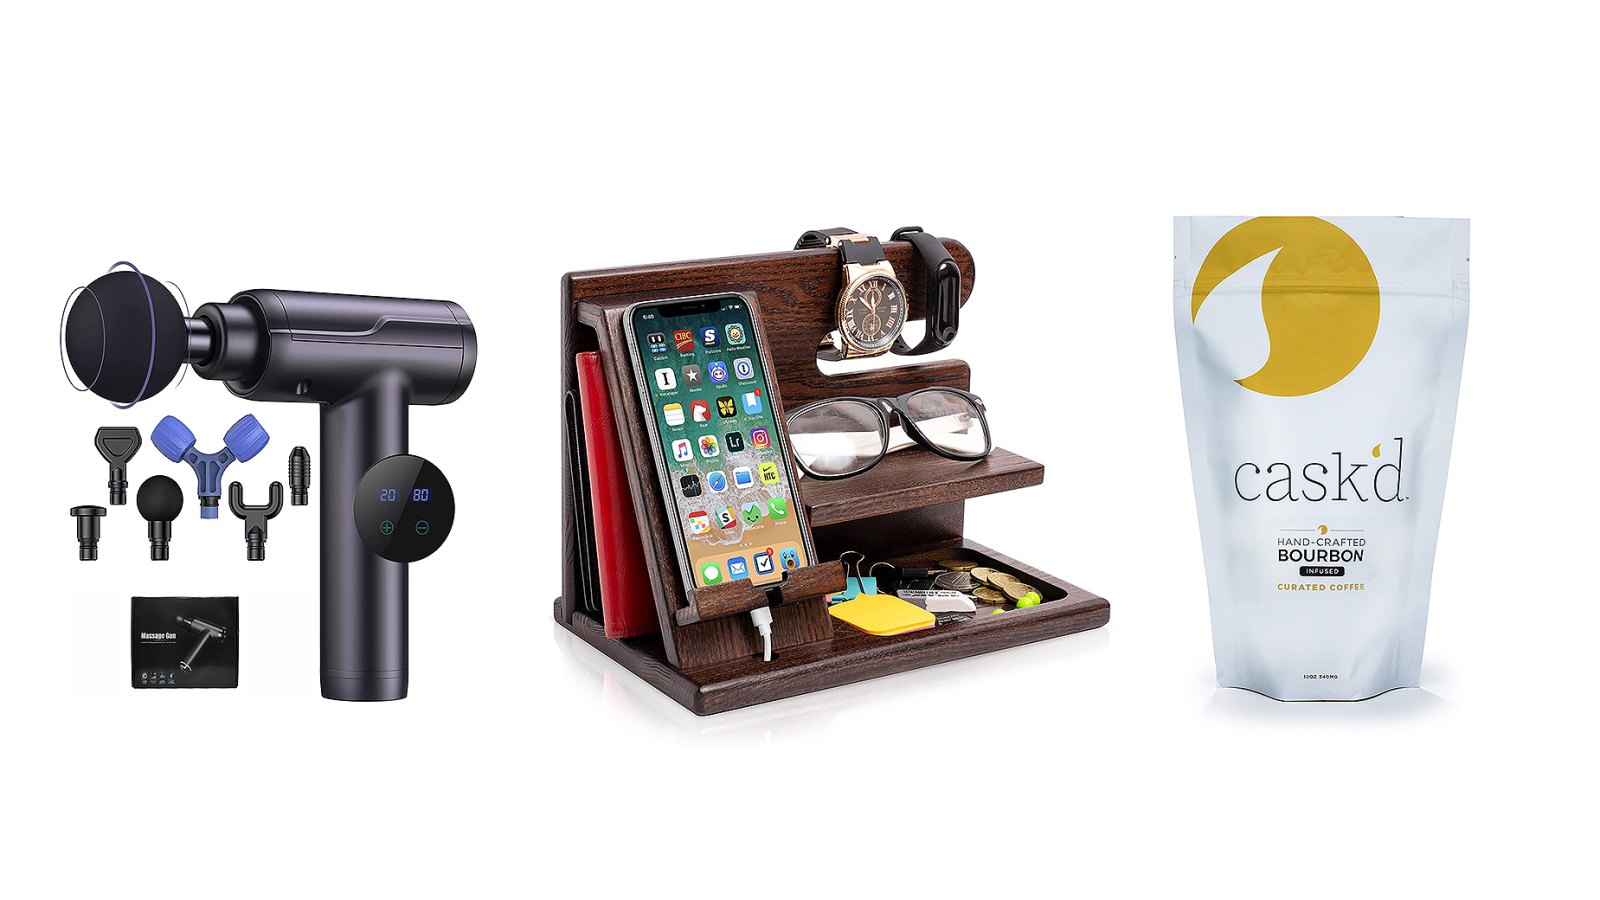 15 Useful Gifts for Dad for under $50